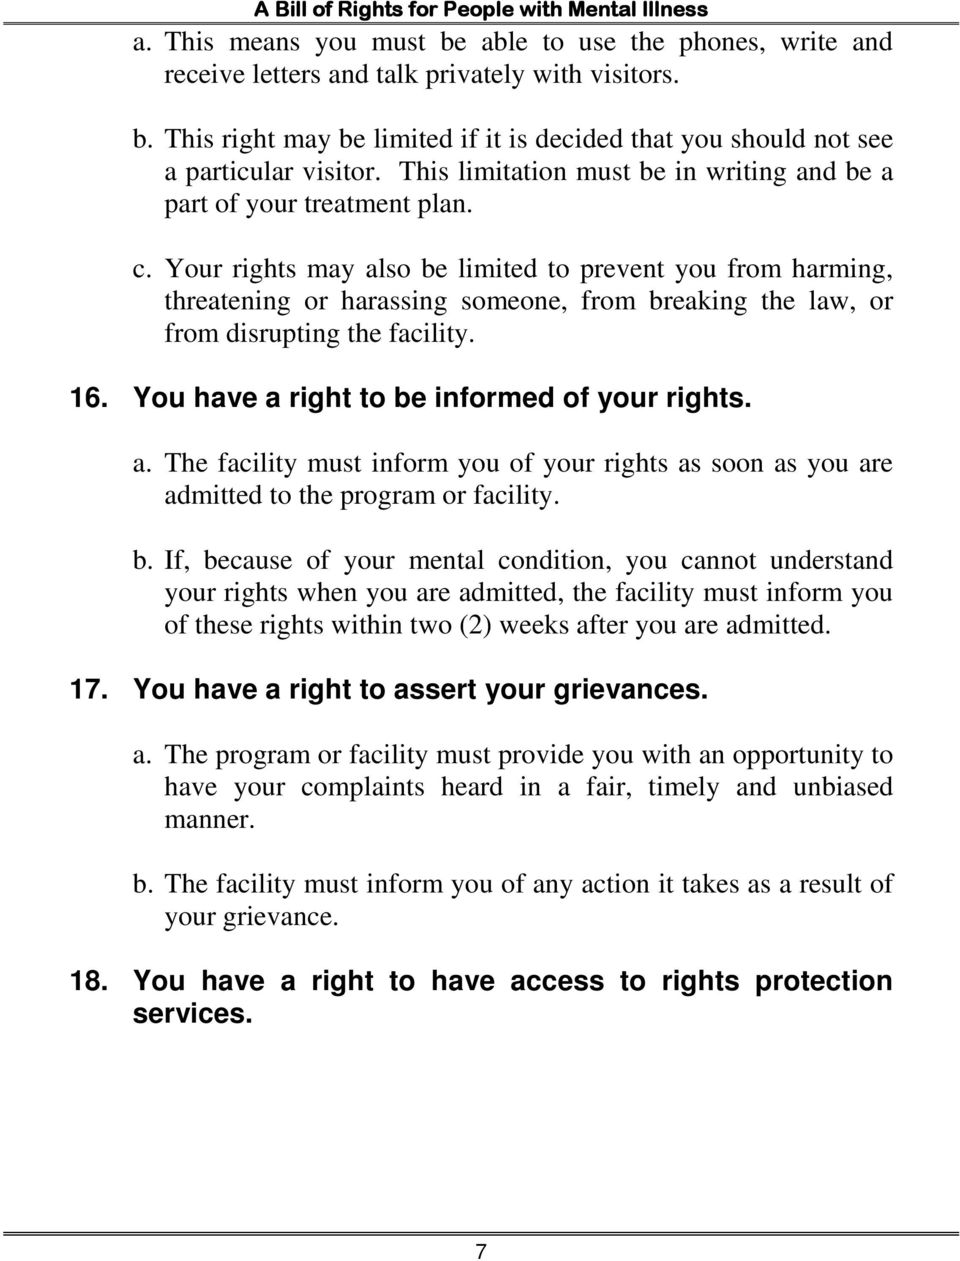 Your rights may also be limited to prevent you from harming, threatening or harassing someone, from breaking the law, or from disrupting the facility. 16.